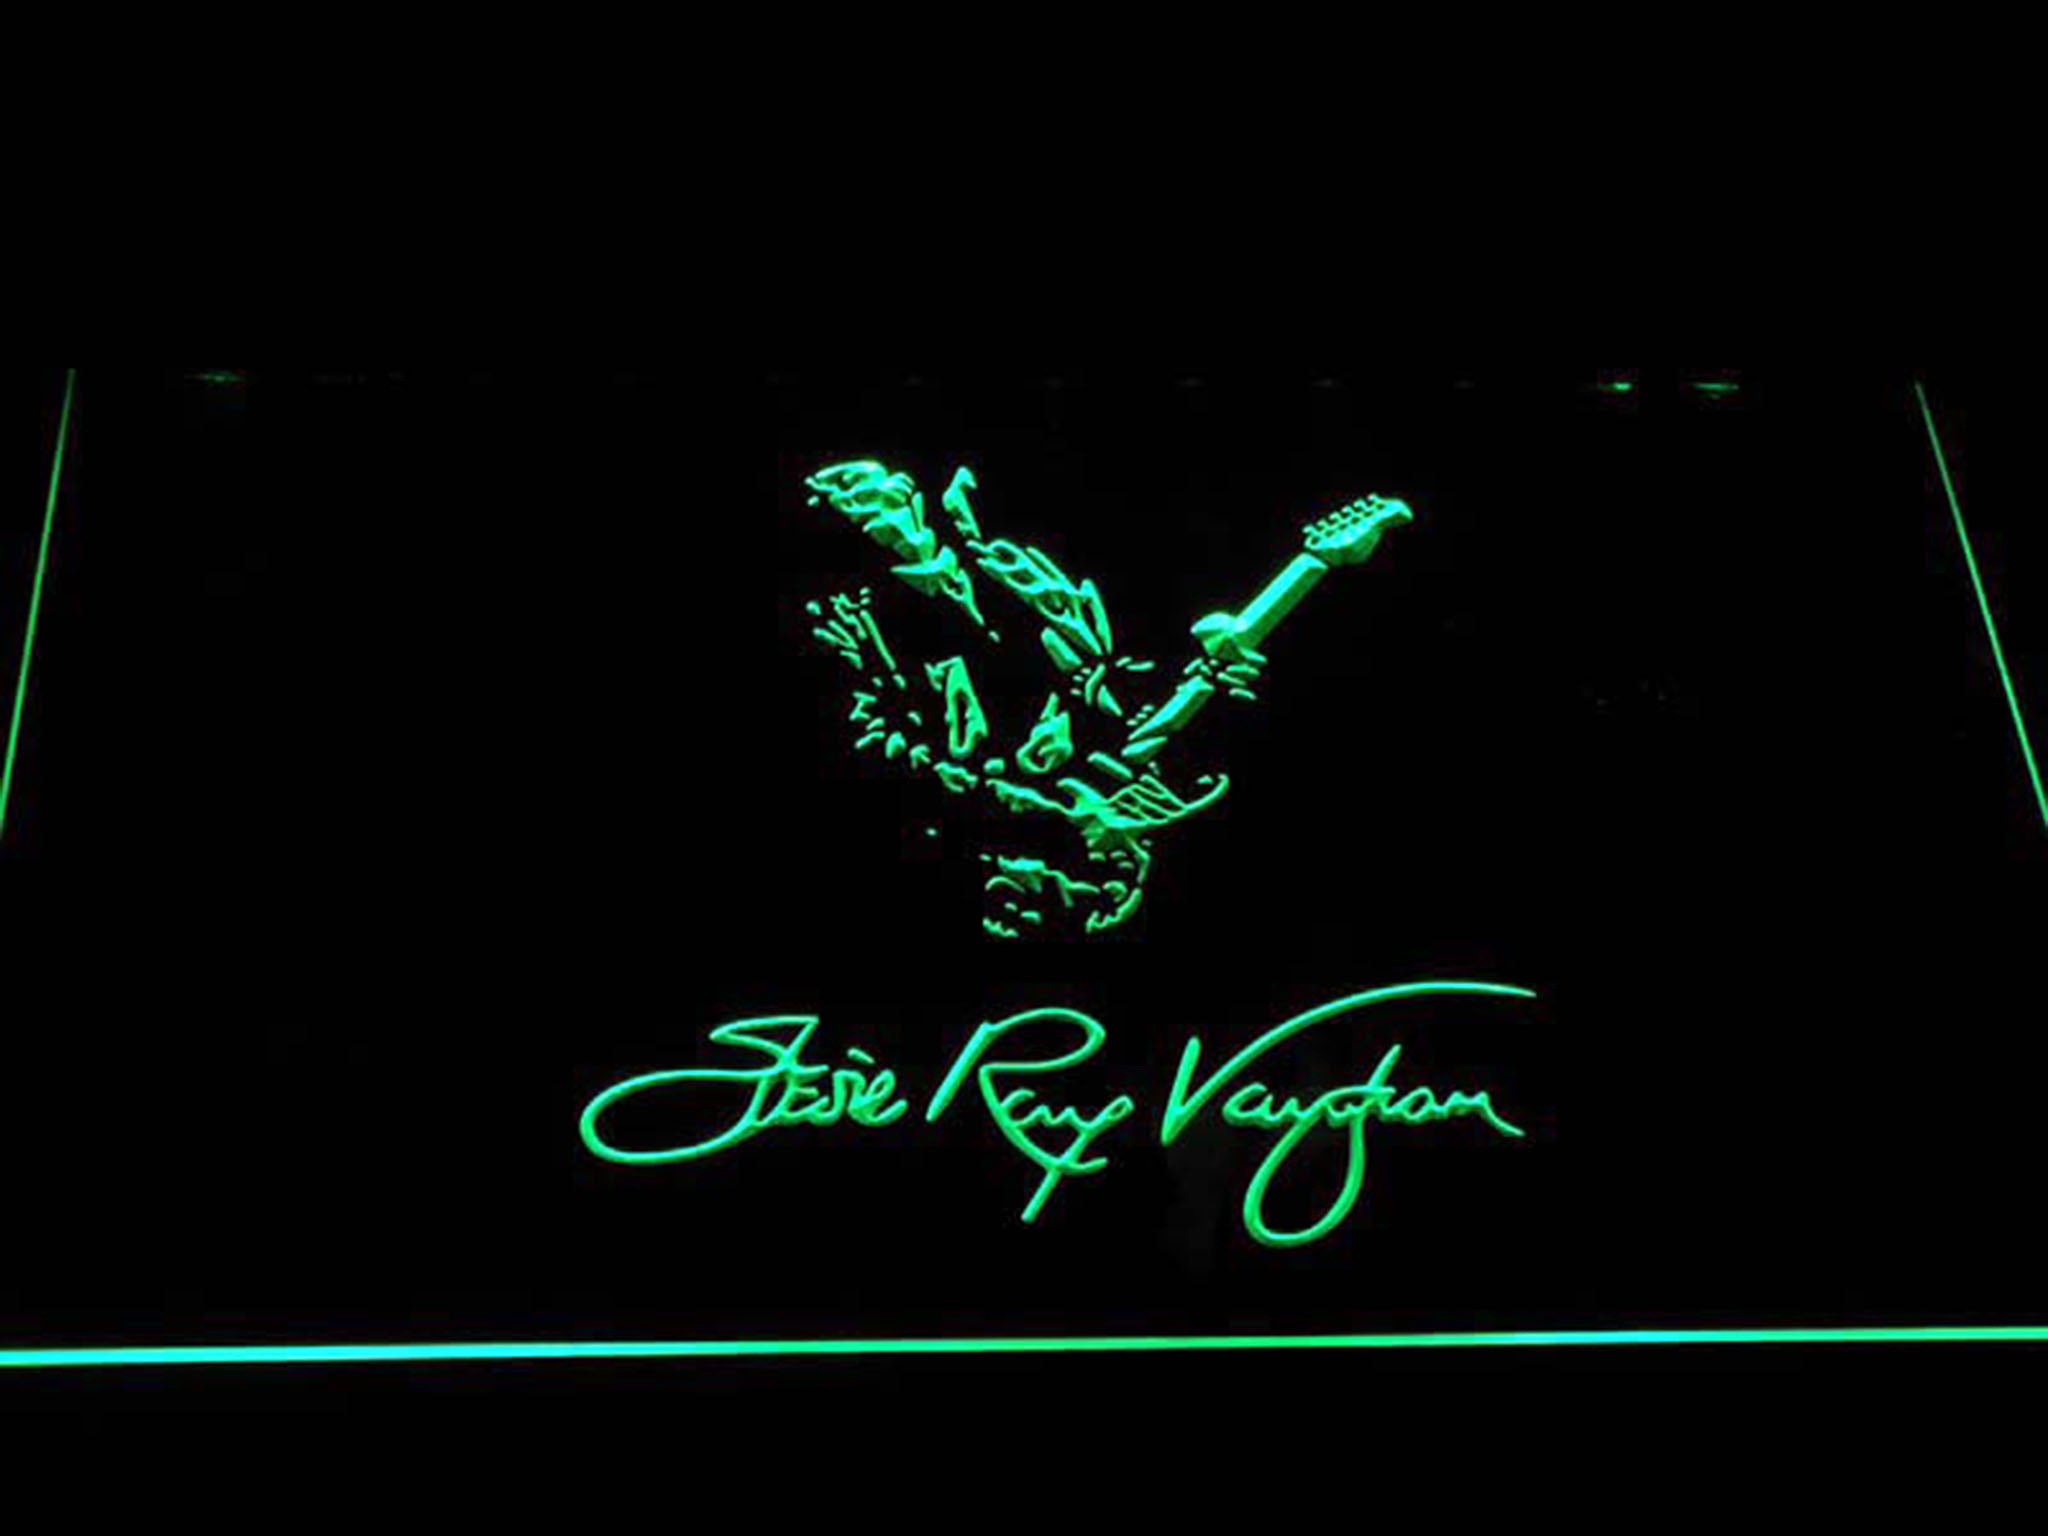 Stevie Ray Vaughan Americna Musician LED Neon Sign